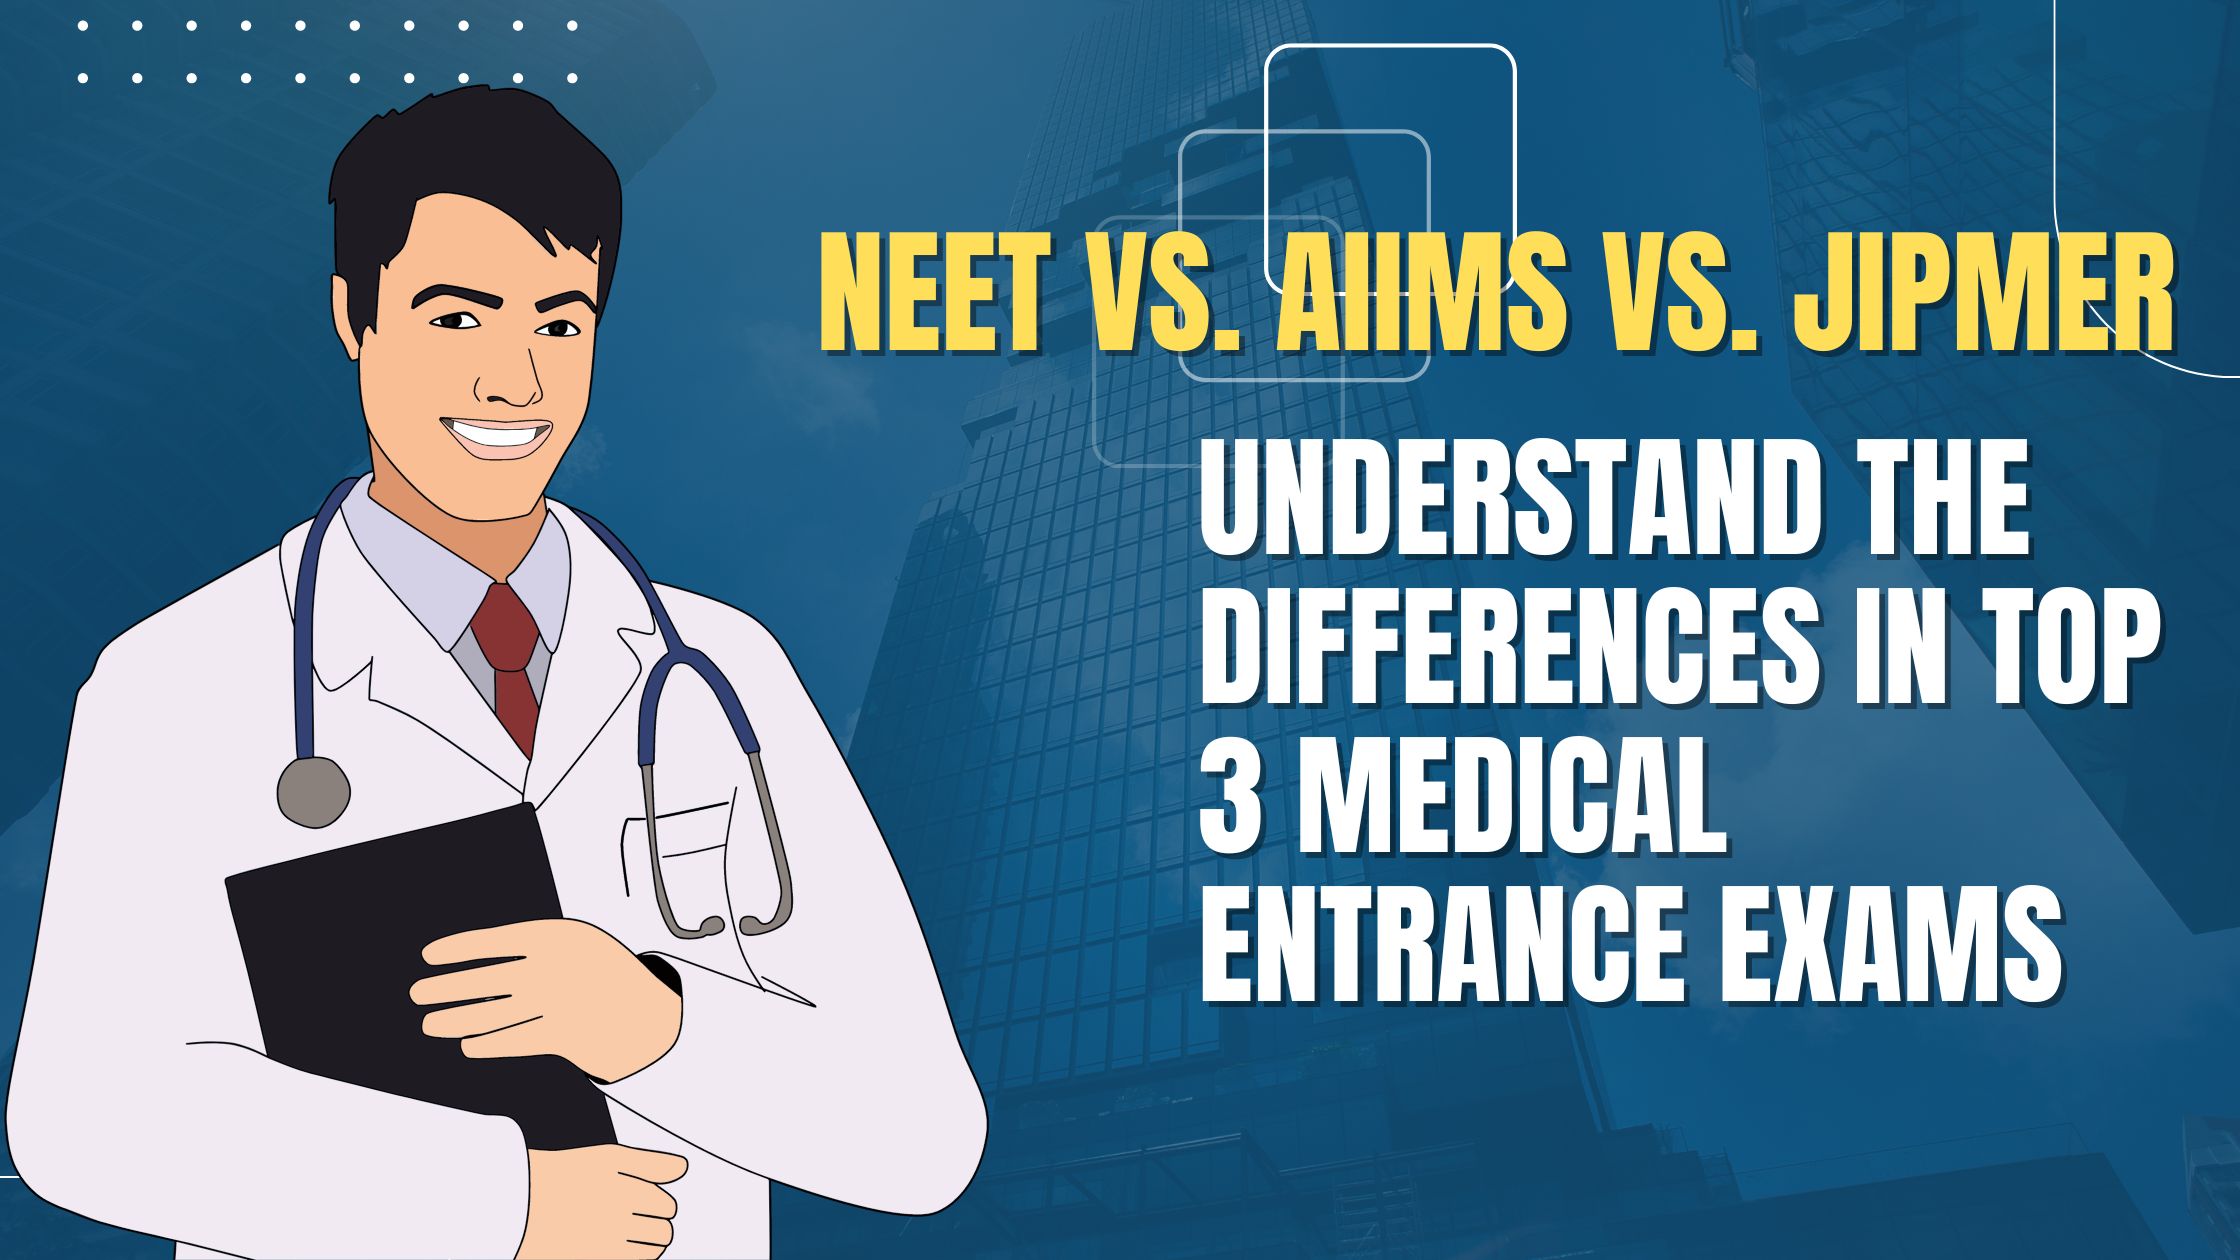 NEET vs. AIIMS vs. JIPMER: Understand the Differences in Top 3 Medical Entrance Exams